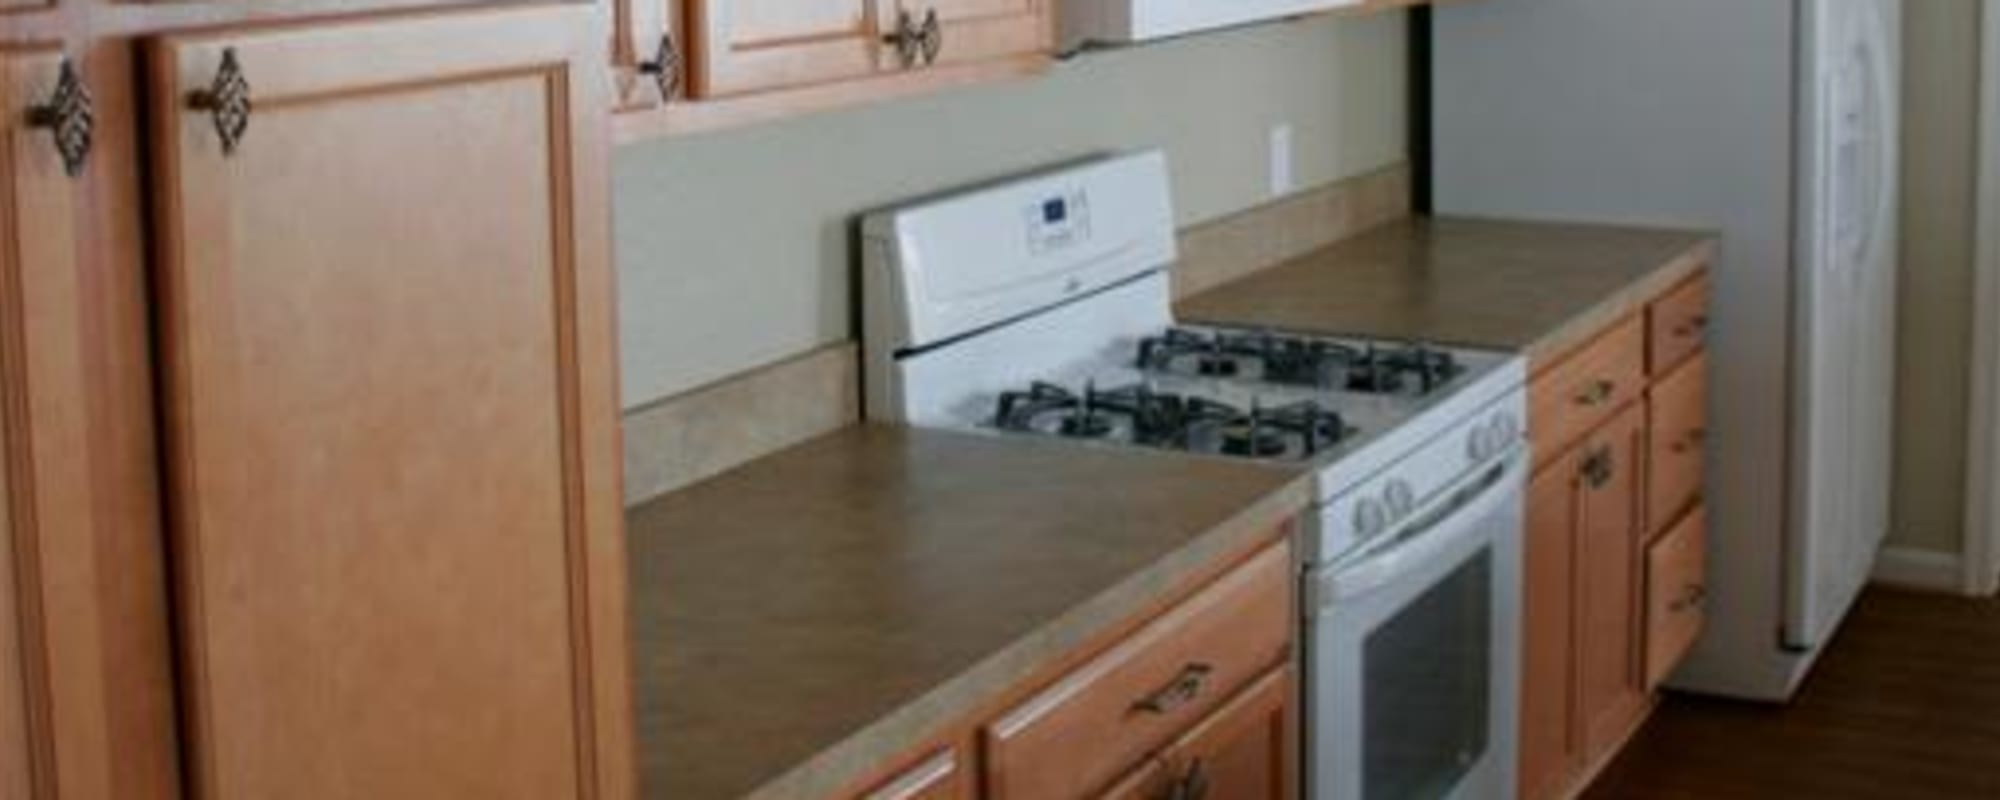 Kitchen amenities in a home at The Village at New Gosport in Portsmouth, Virginia